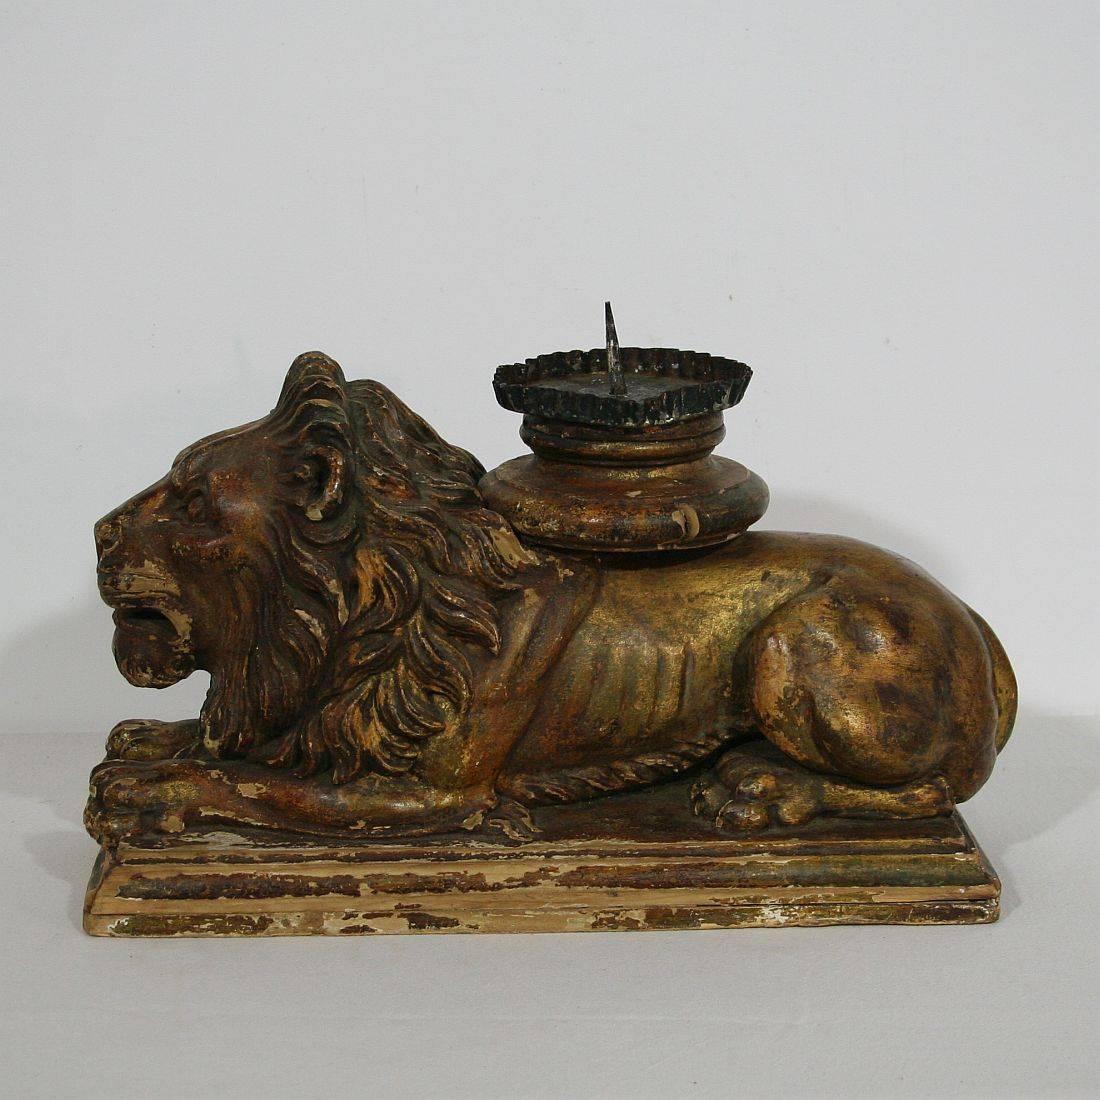 Hand-Carved Italian 18th Century Baroque Carved Wooden Lion with Candle-Holder